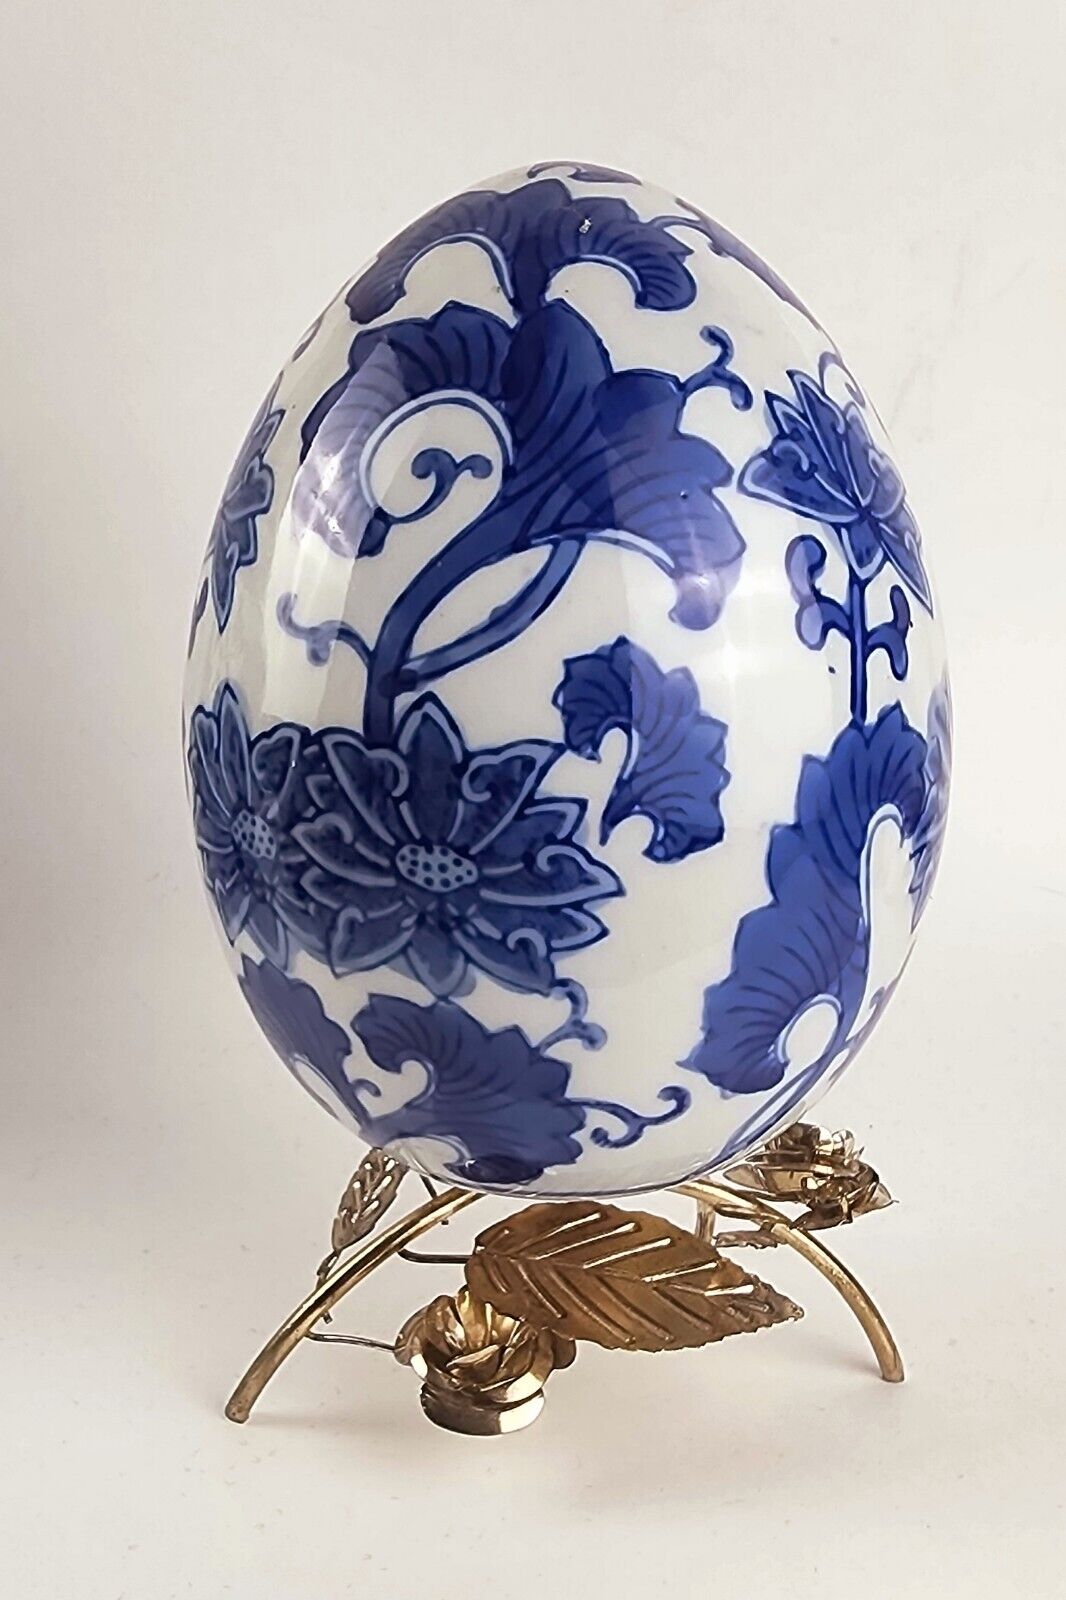 Large Blue and White Decorative Egg, Blue Flowers, 6